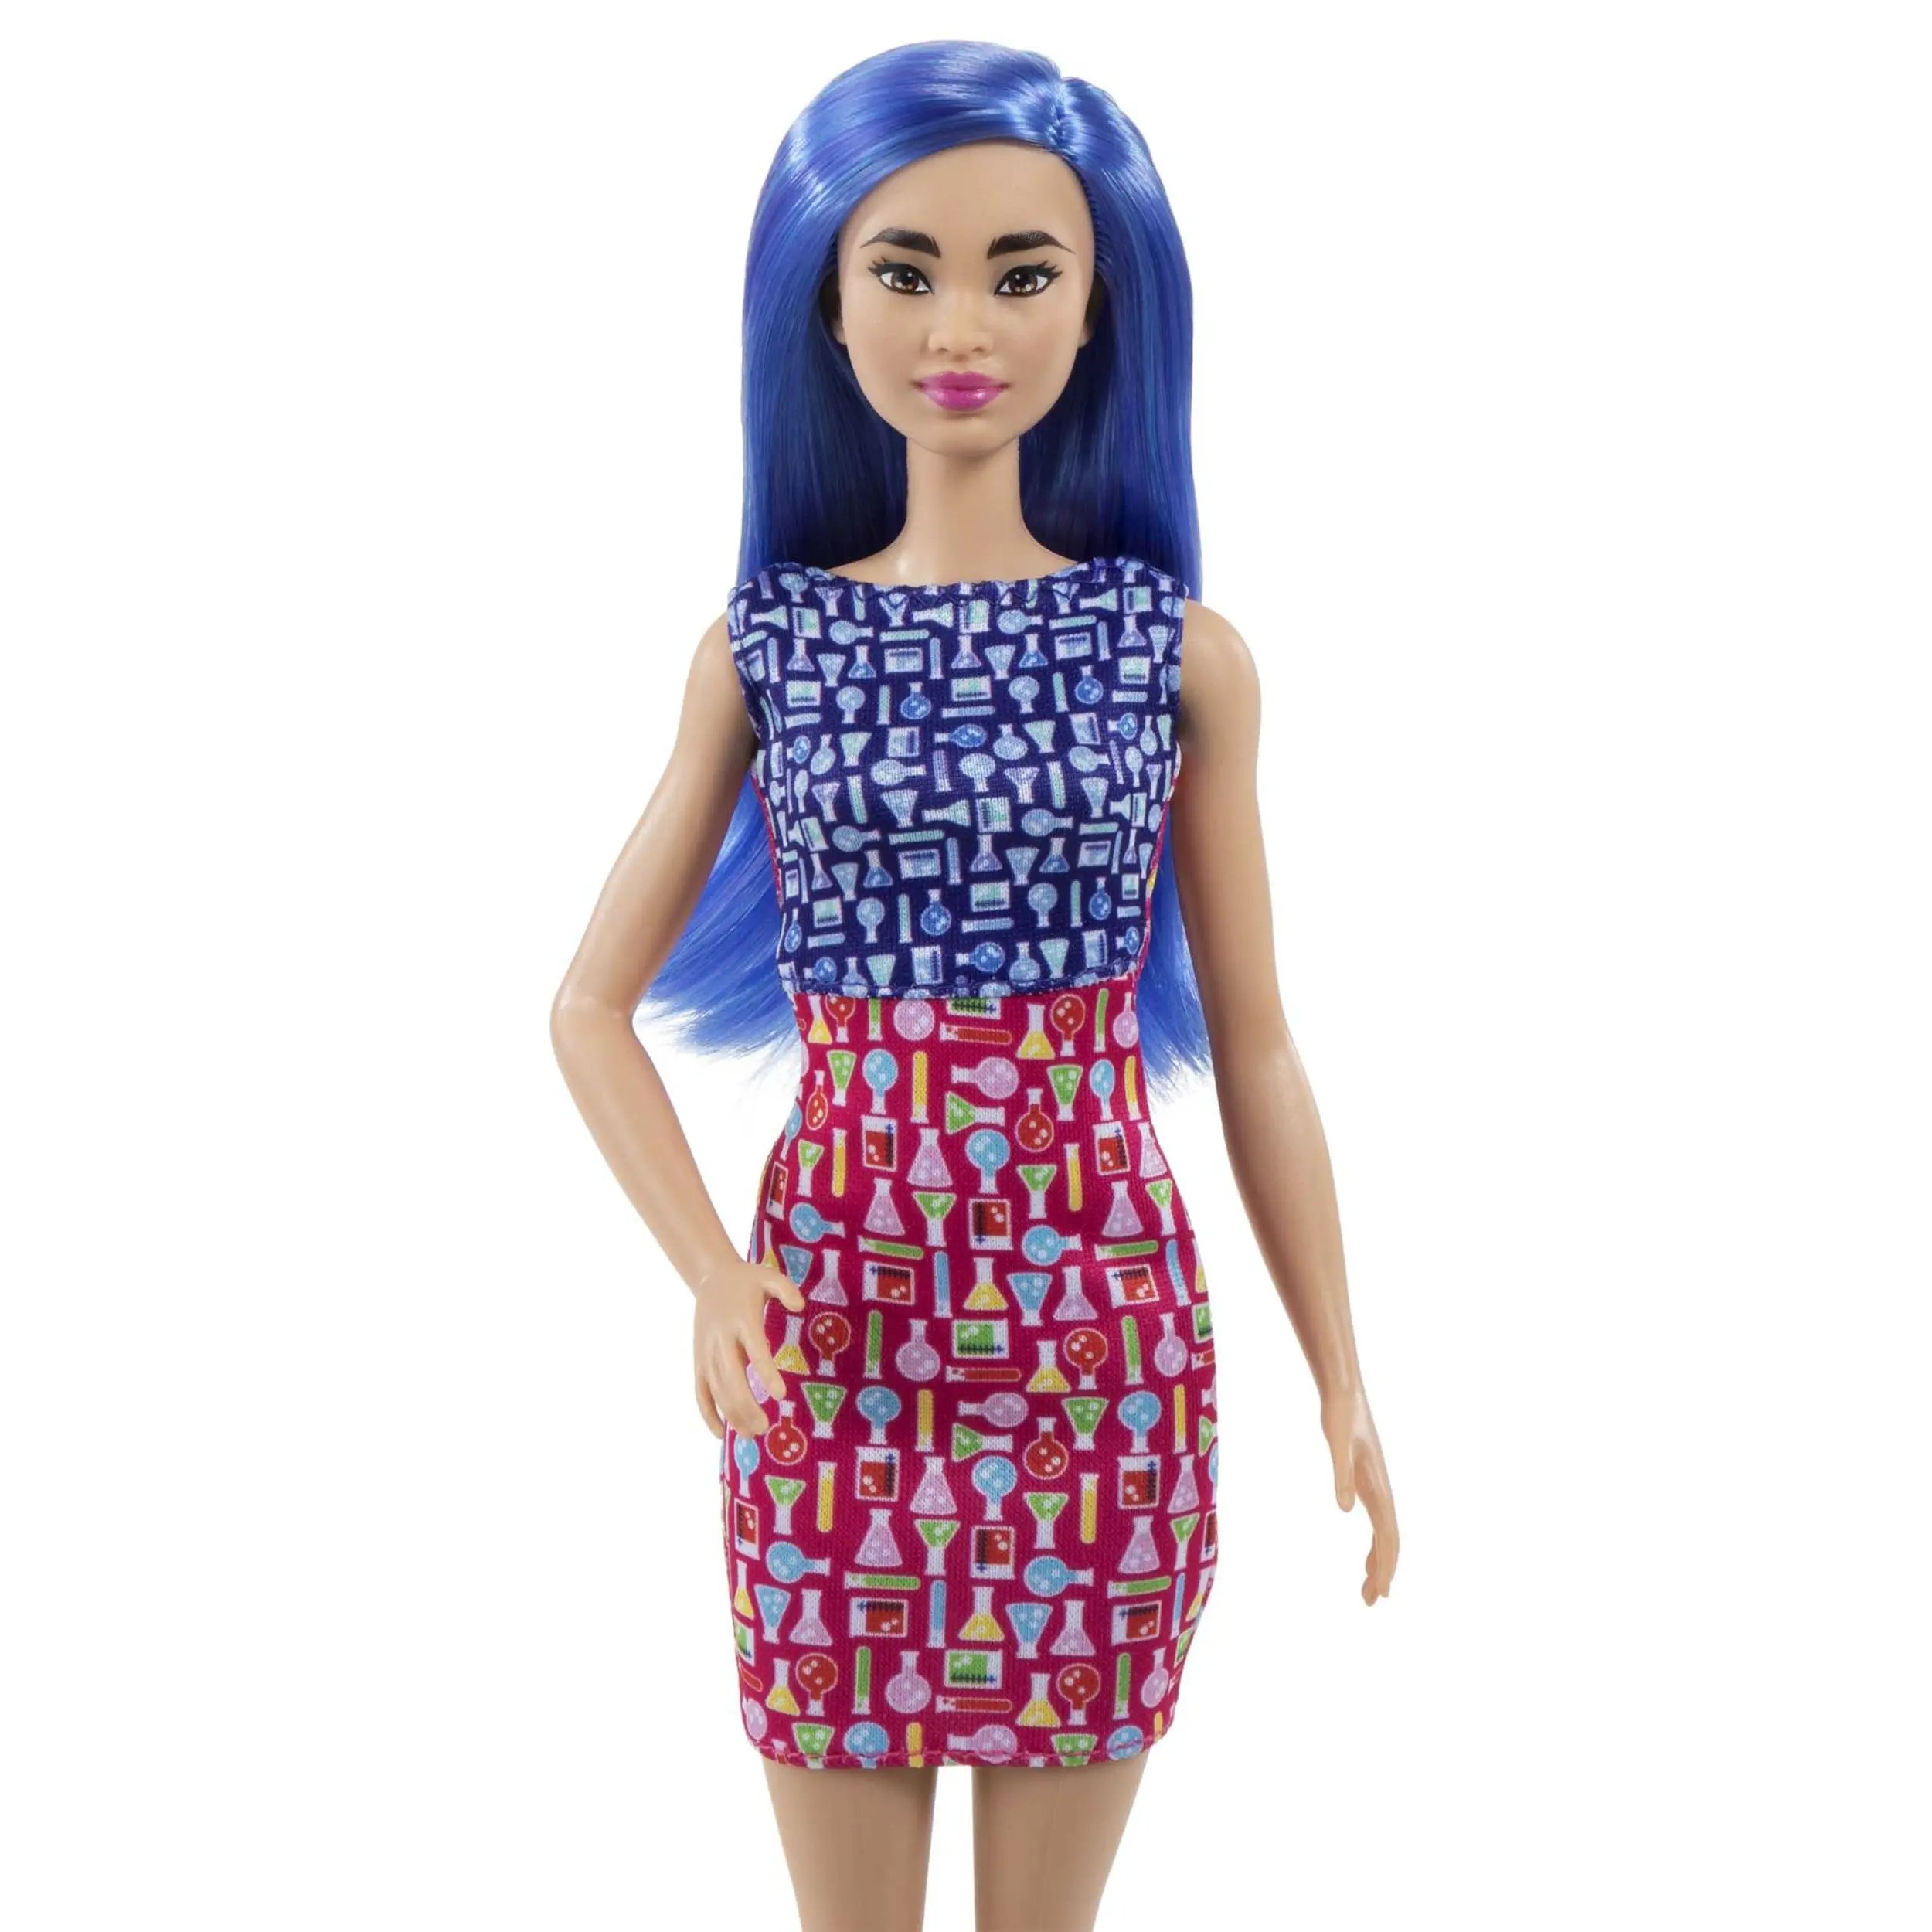 Mattel - Barbie You can Be Anything - Scientist Doll HCN11